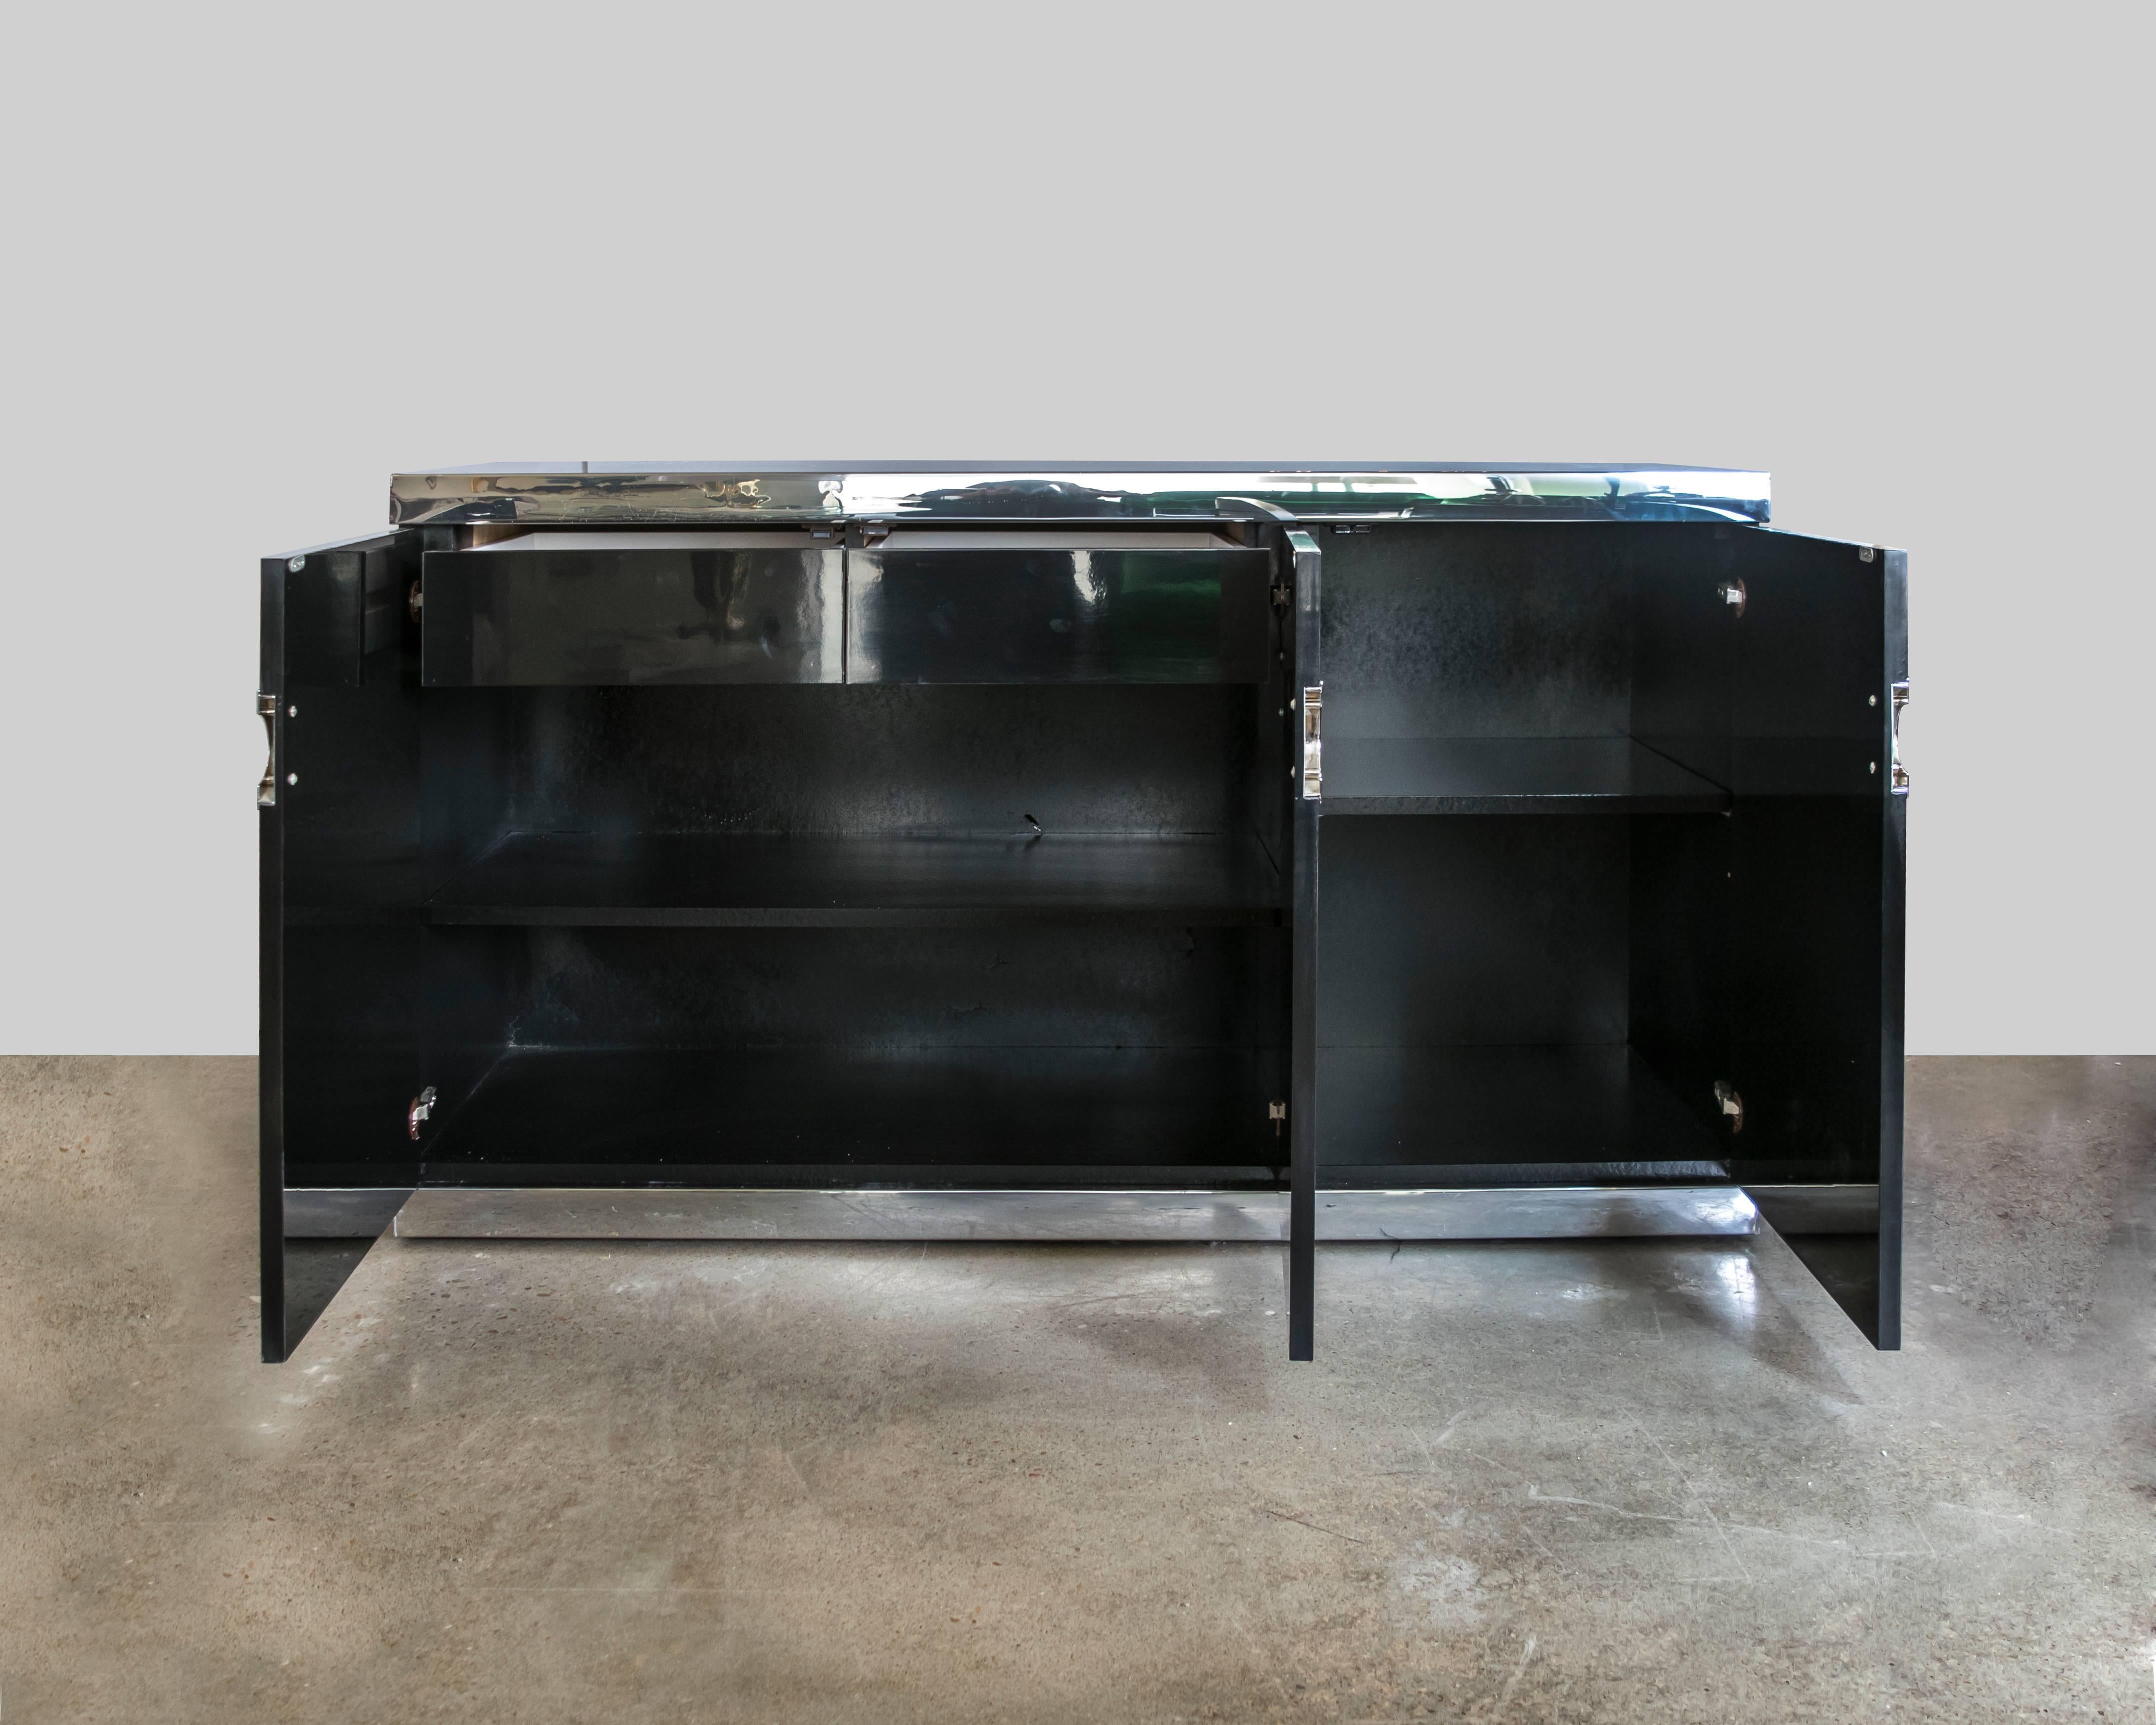 Fashion designer Pierre Cardin expanded his repertoire by adding furniture in the early 1960s which has become highly desirable. This three-door credenza in black lacquer has his characteristic broken double C hardware, complete with signature on